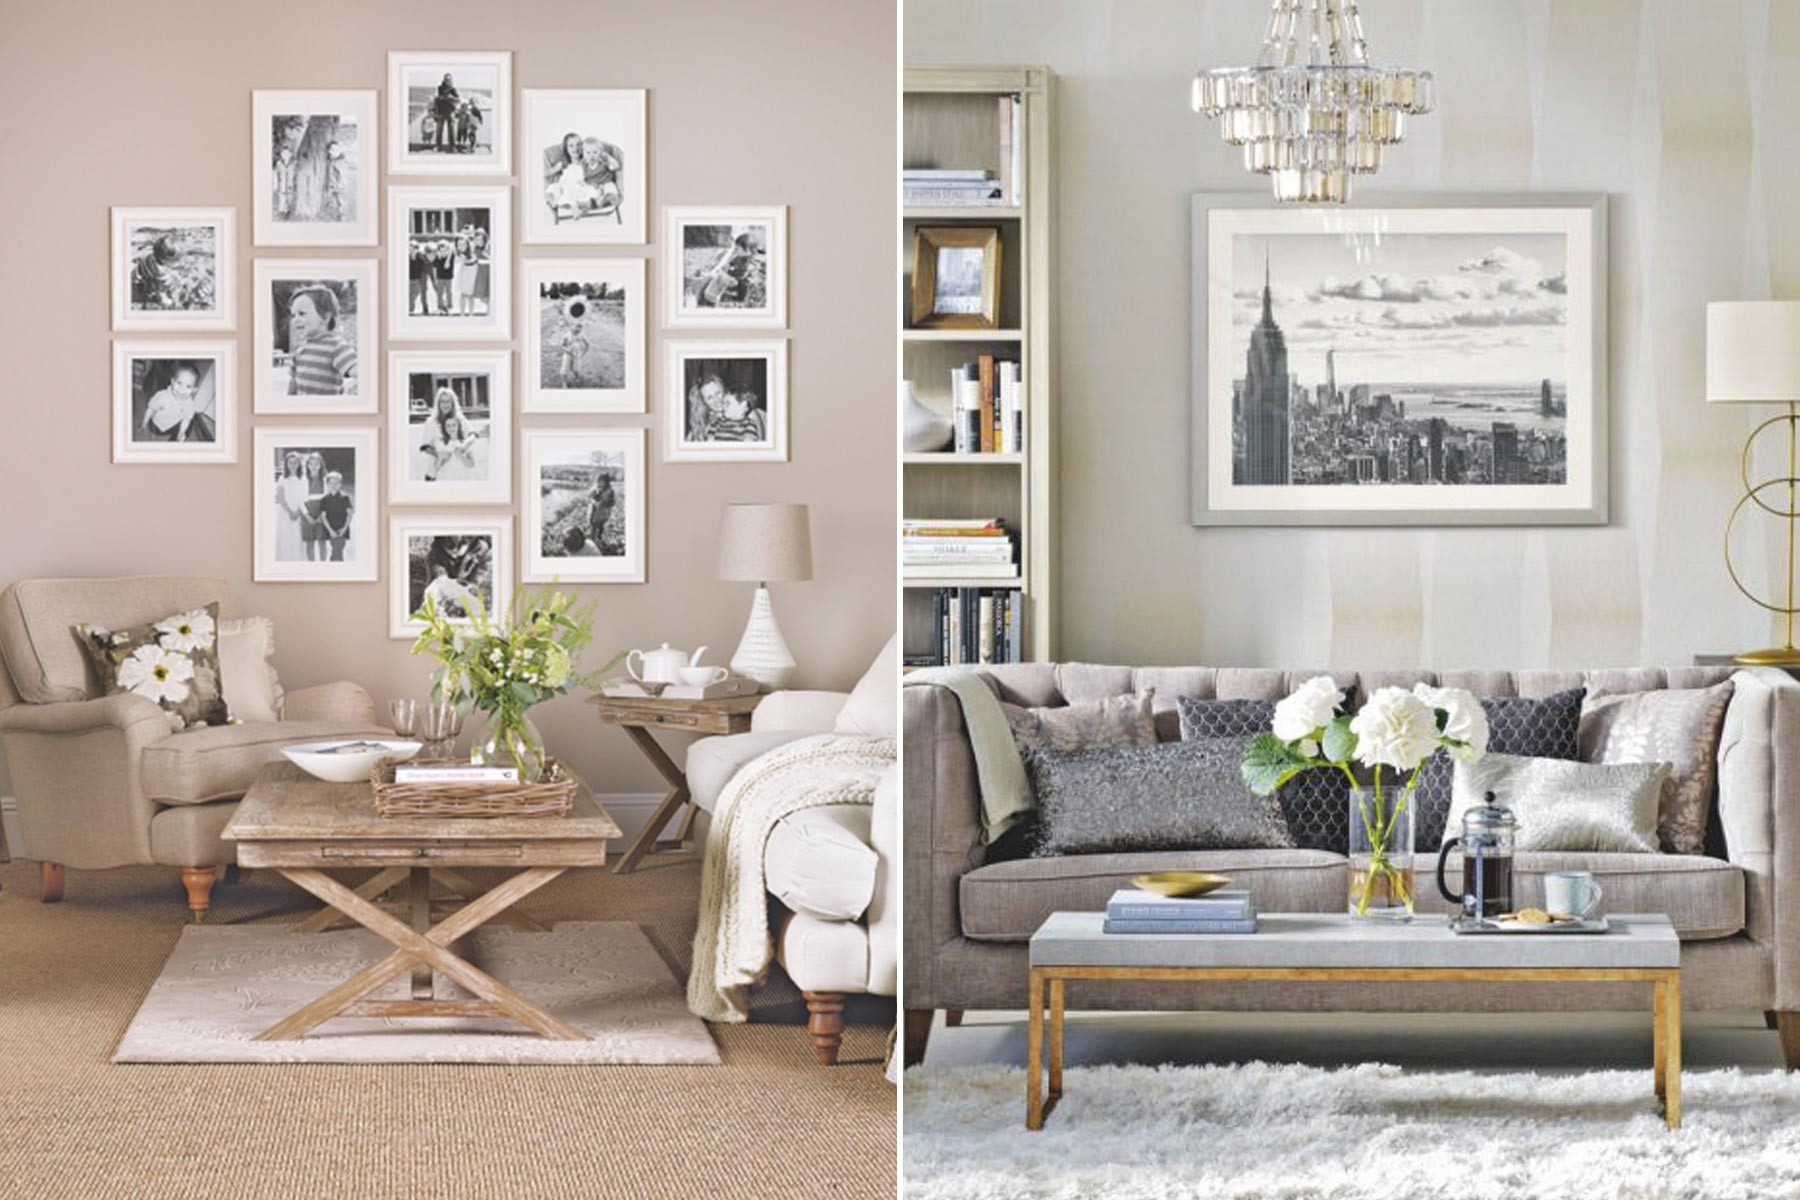 kavclanwaits4one: How Can I Decorate My Living Room